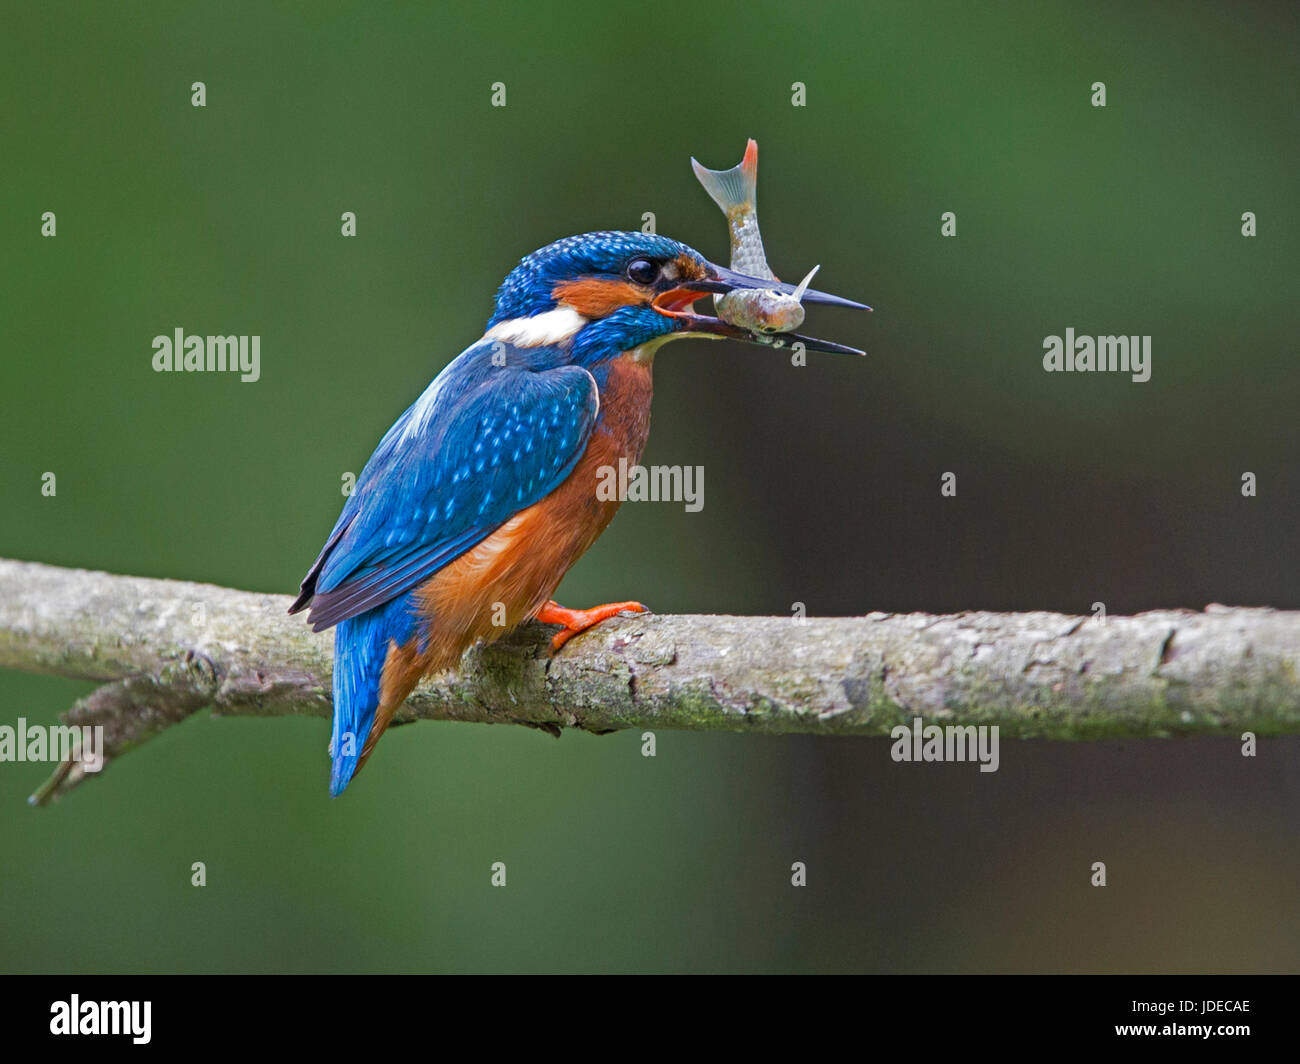 Female common kingfisher with fish in beak perched Stock Photo